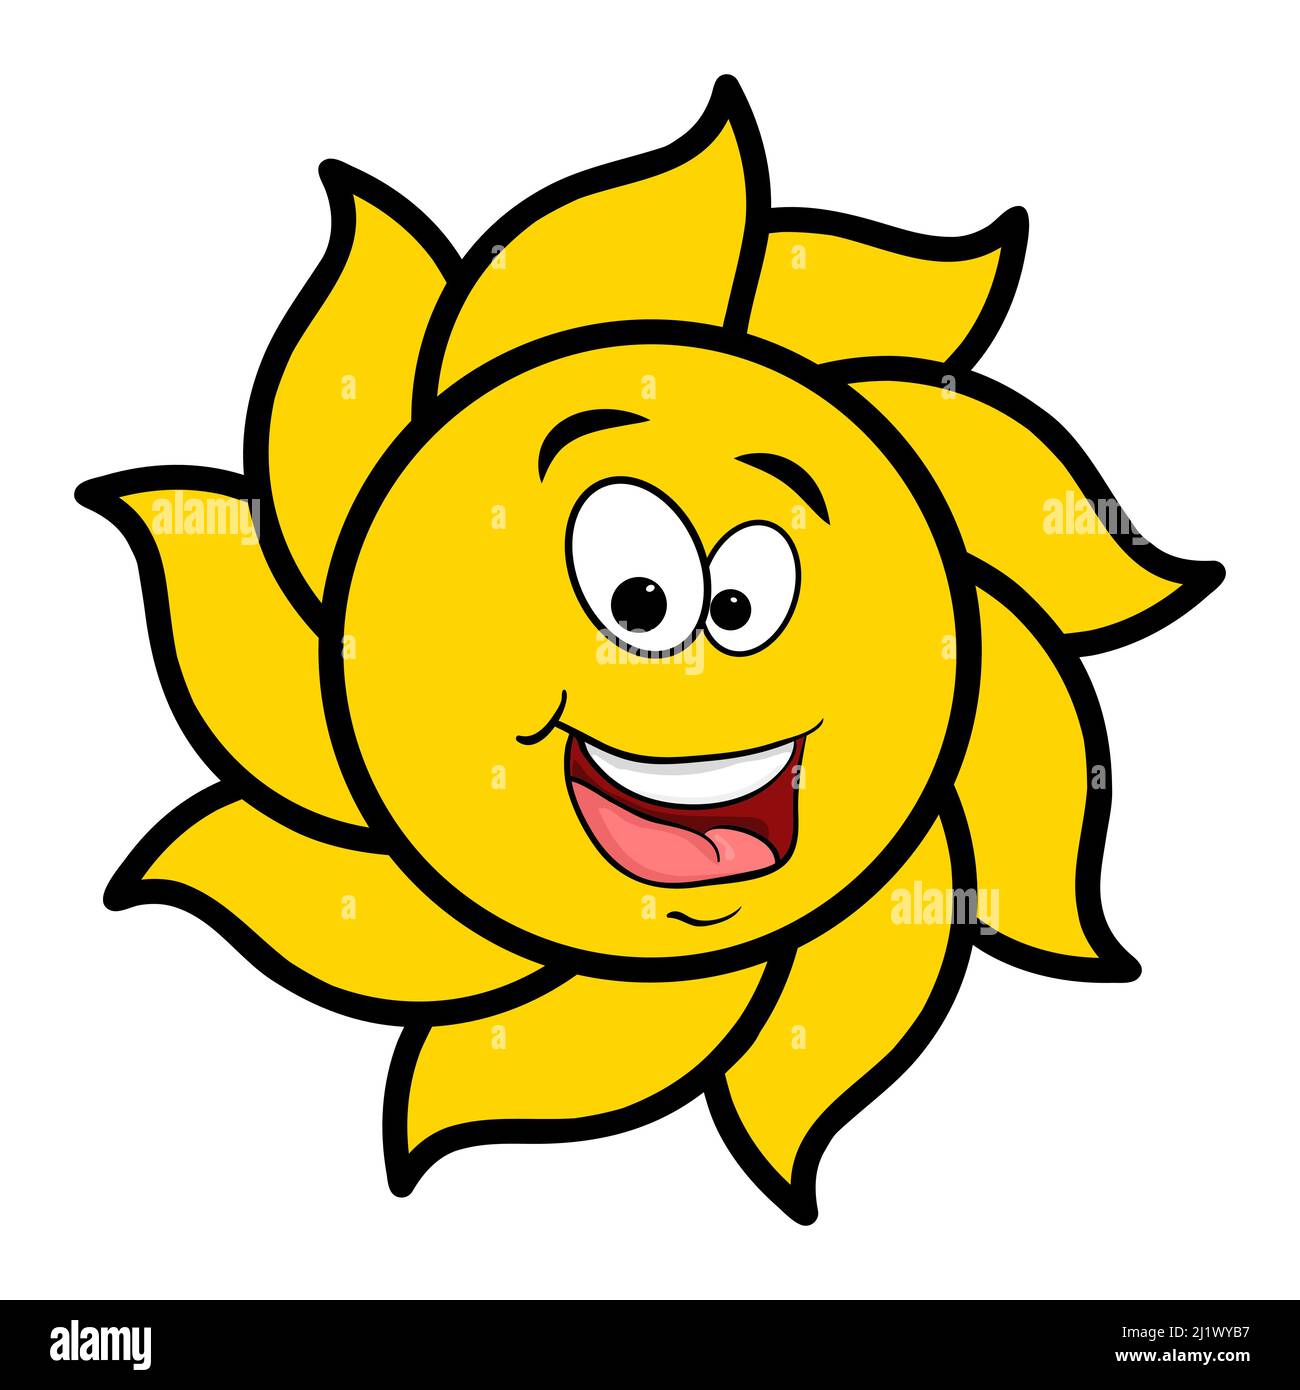 Sun character with eyes. Vector illustration isolated on white background. Stock Vector